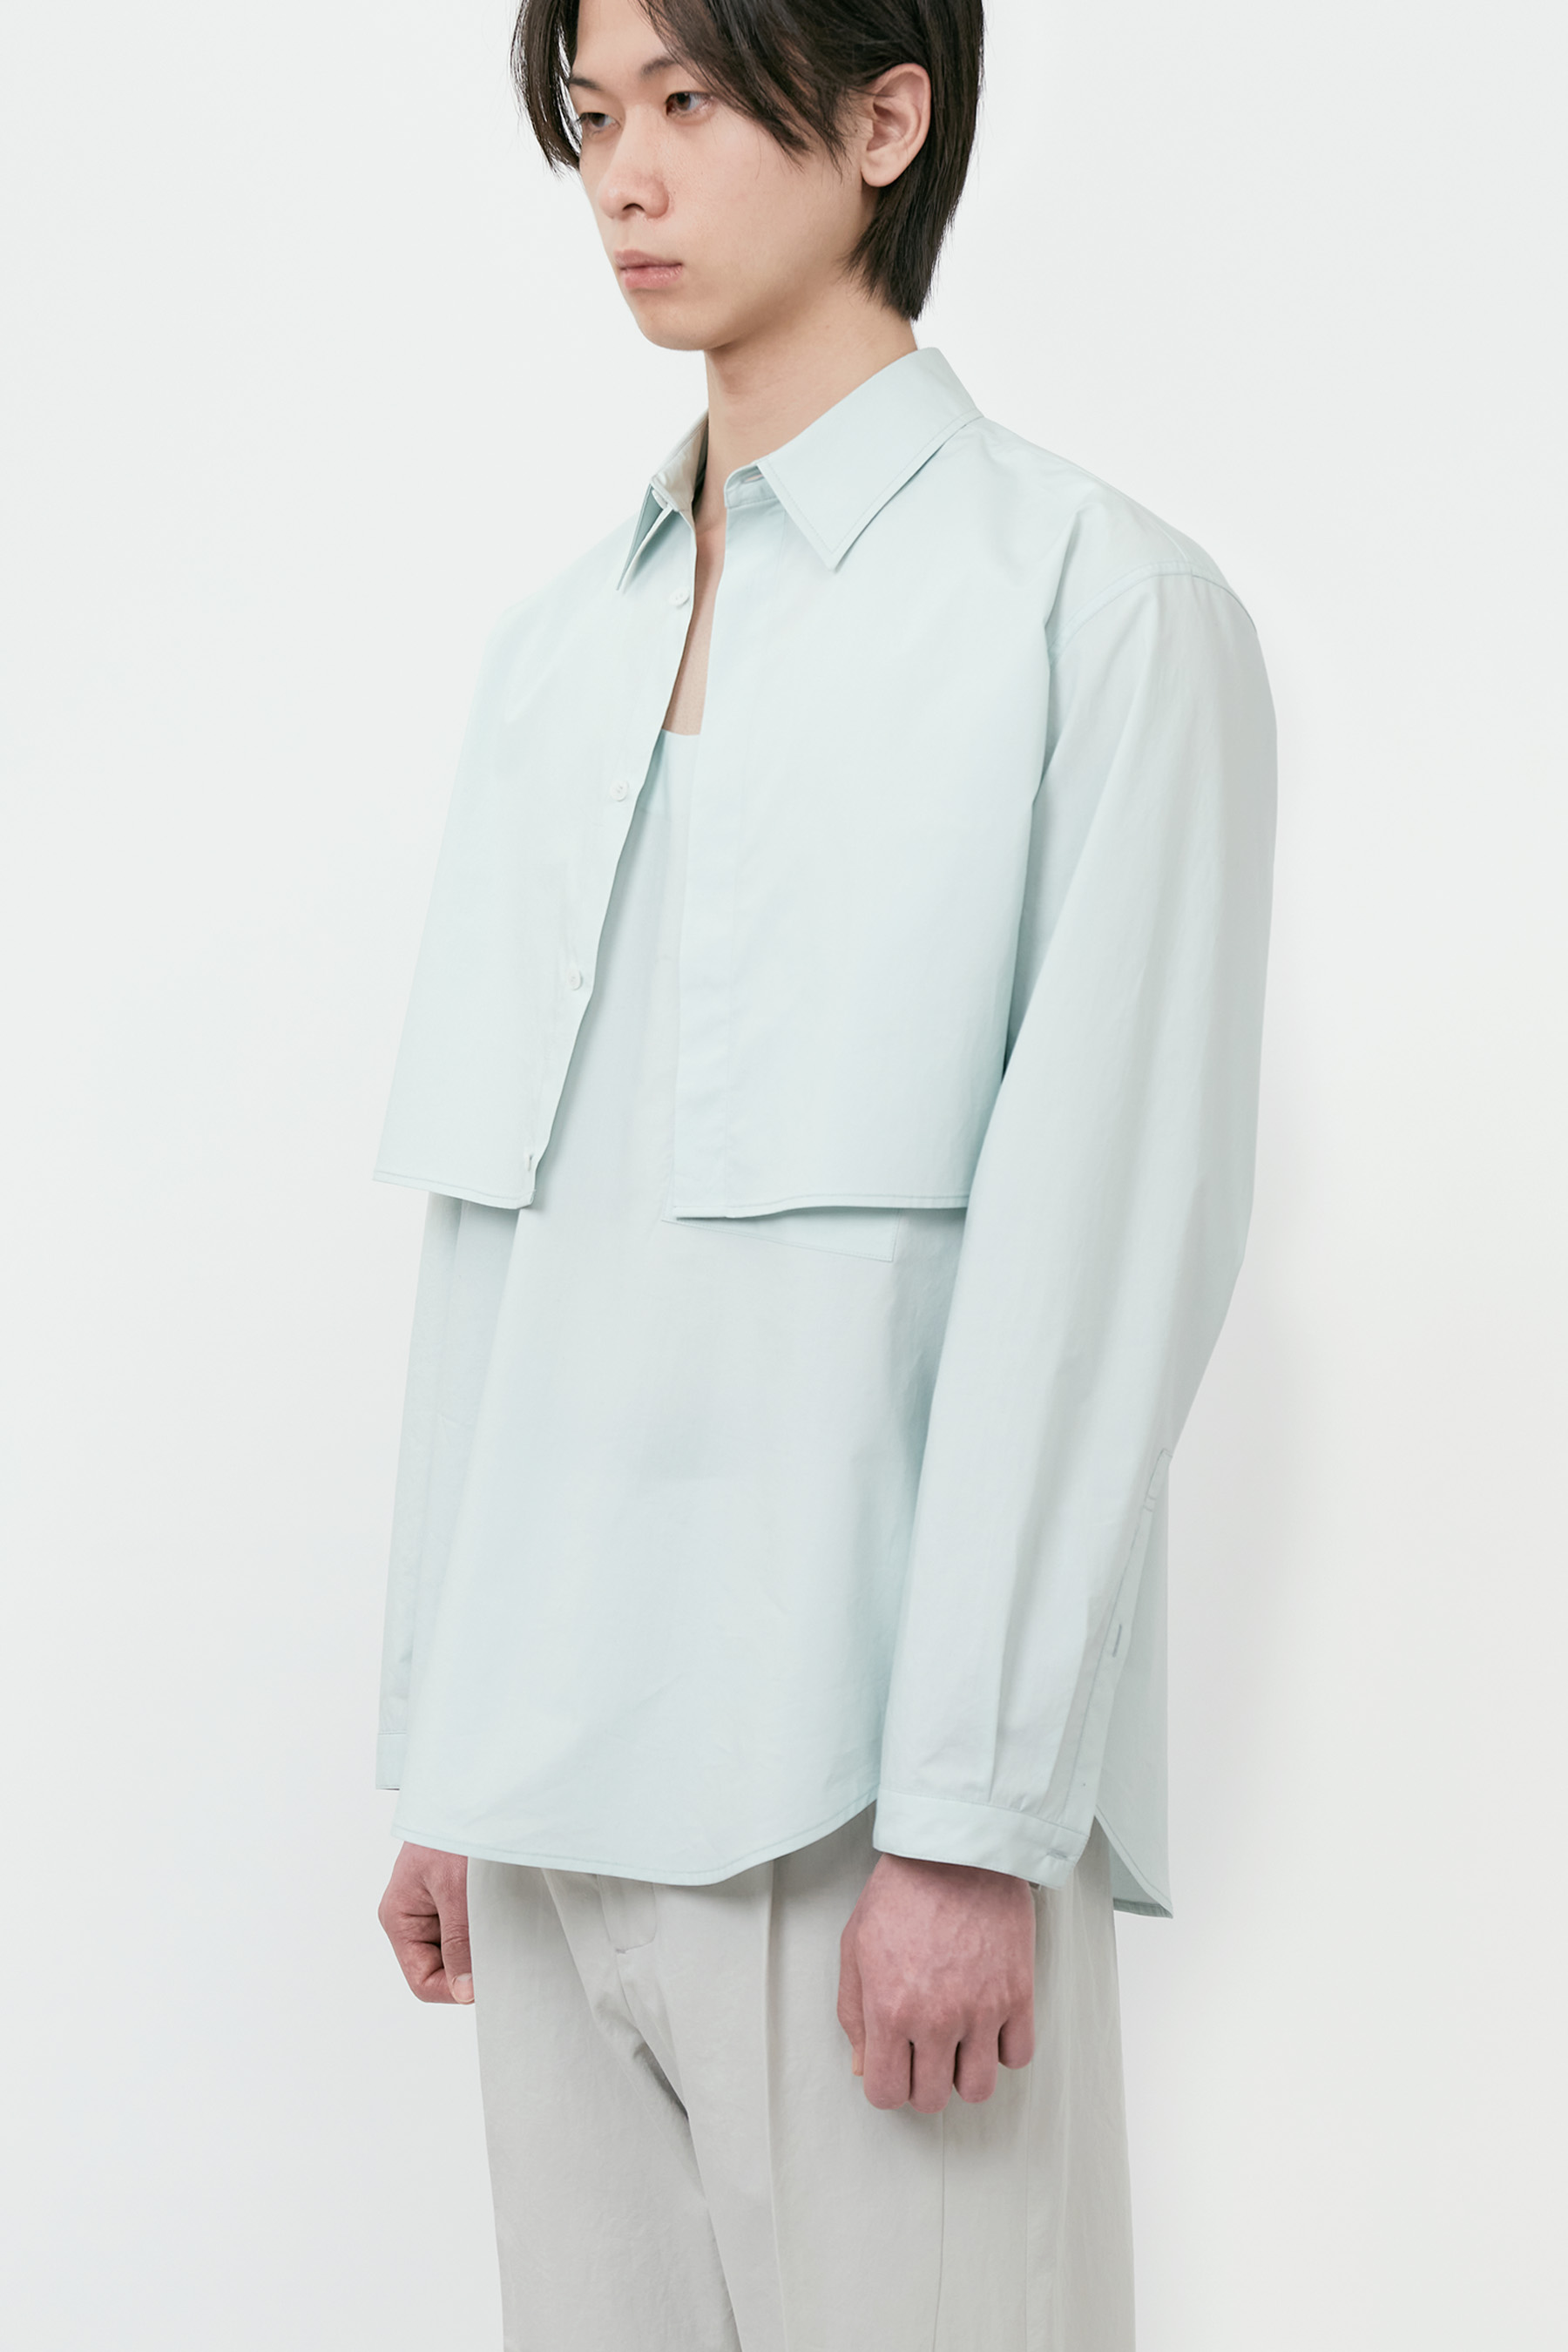 MINT GREEN TWO PIECE SHIRTS